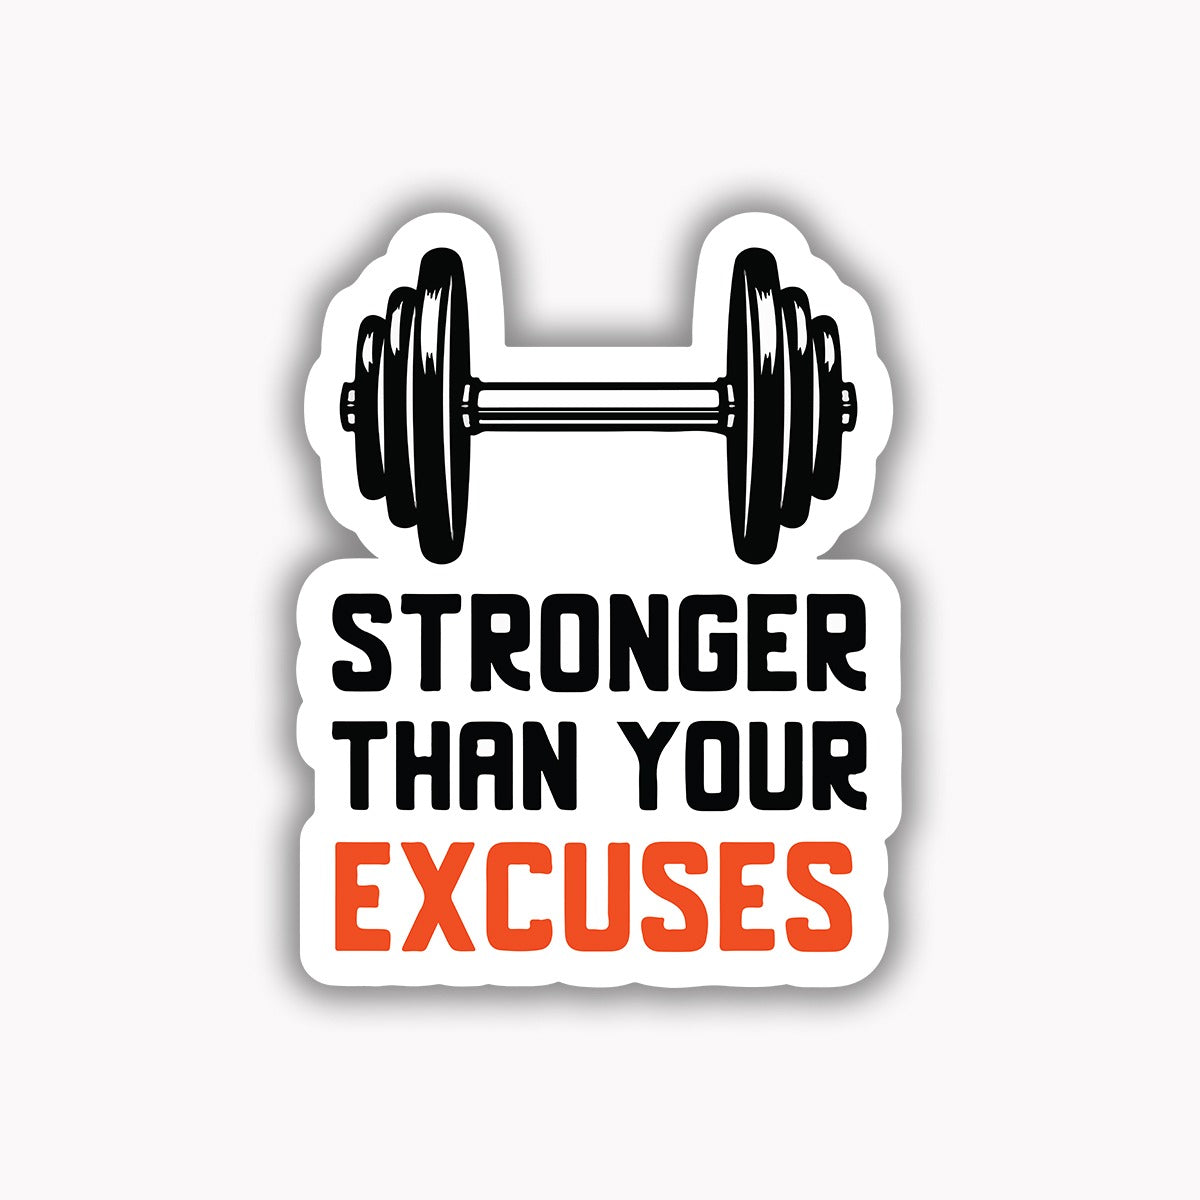 Stronger than your excuses